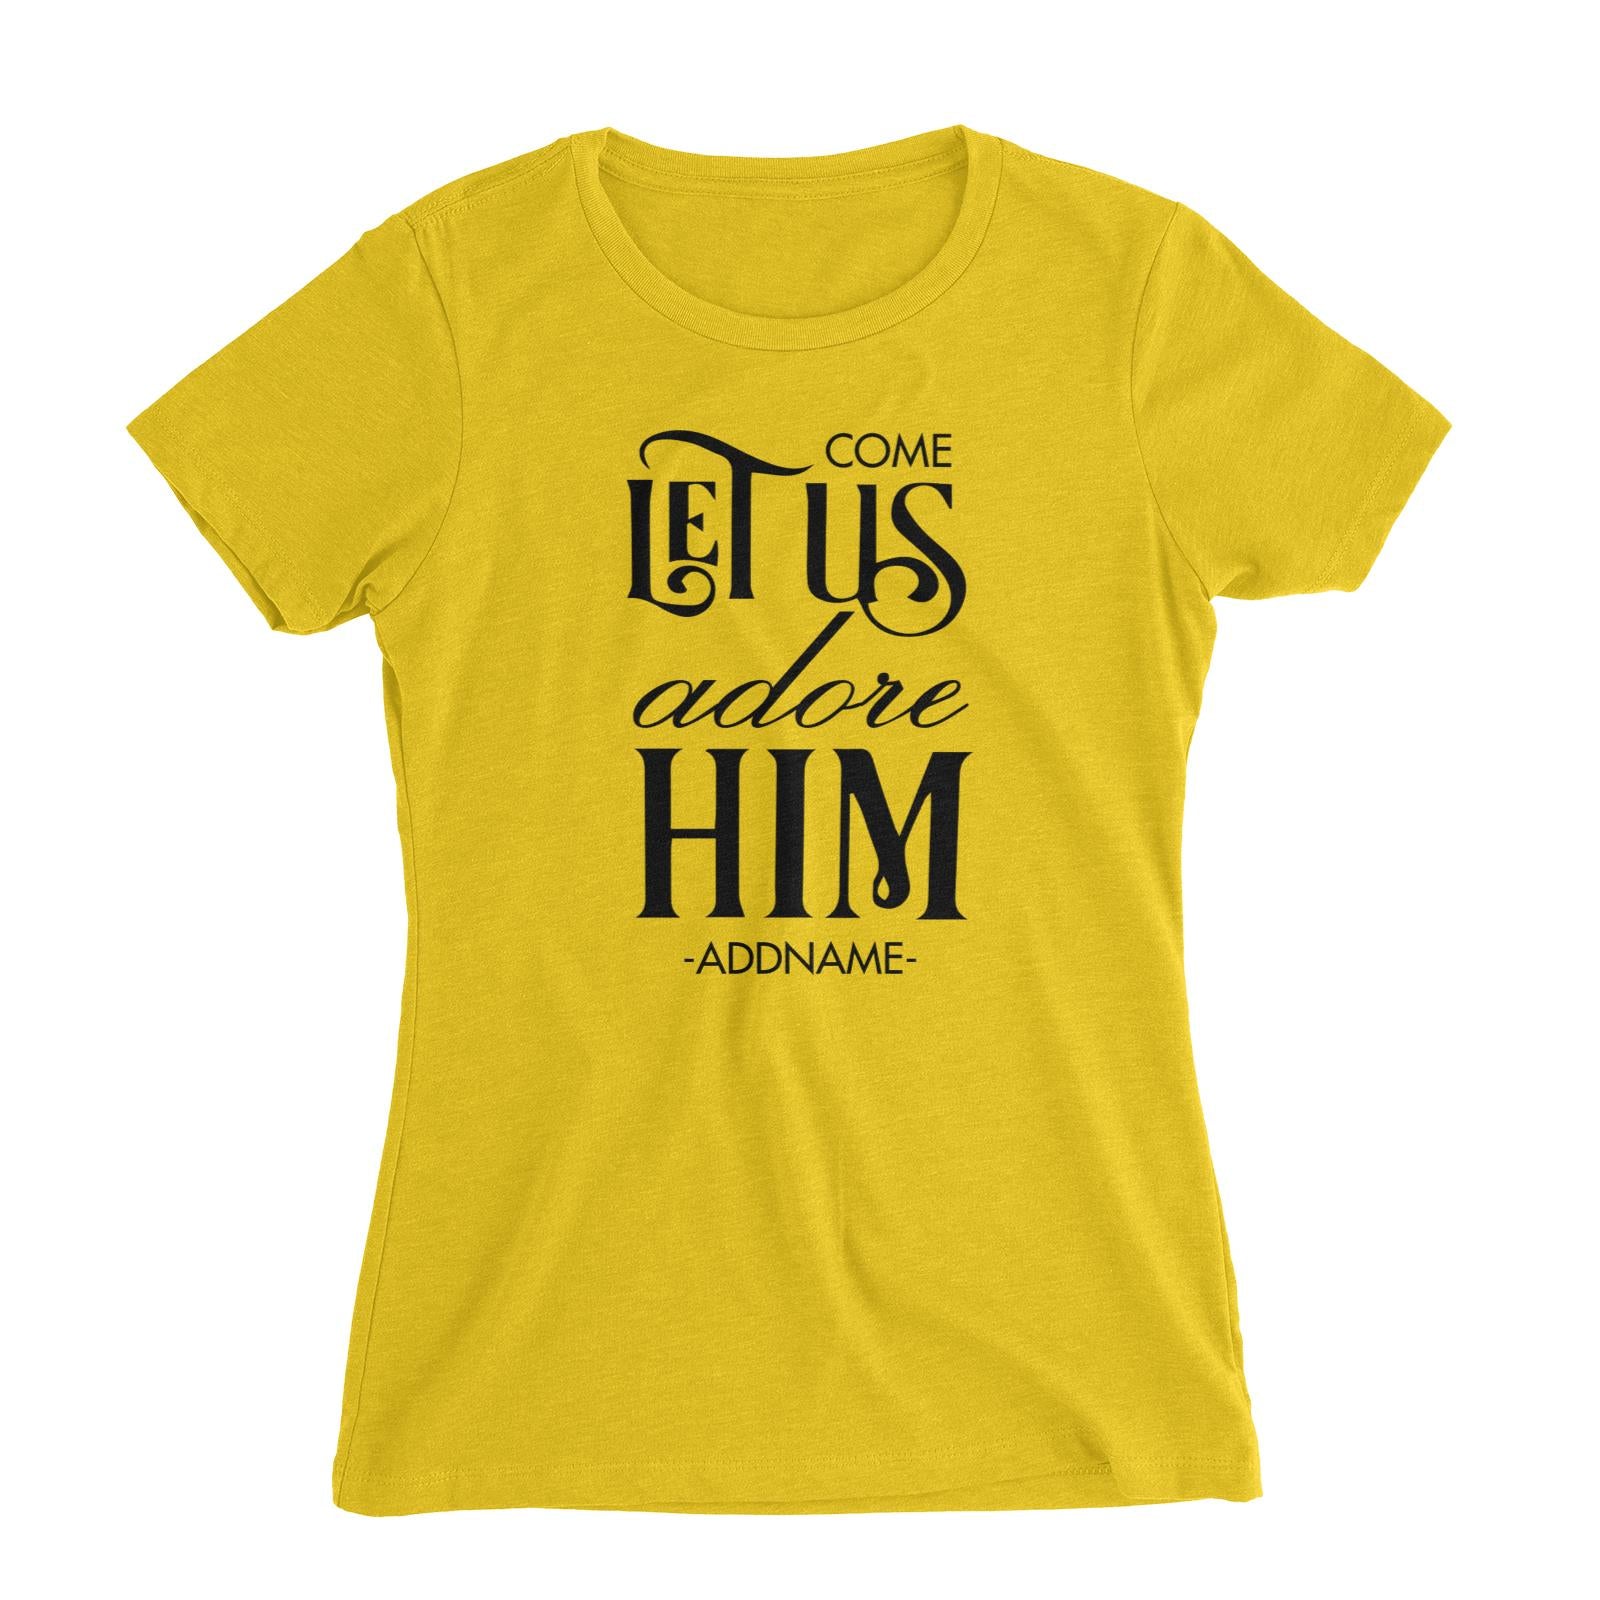 Come Let Us Adore Him Addname Women's Slim Fit T-Shirt Christmas Personalizable Designs Matching Family Jesus Lettering Religious